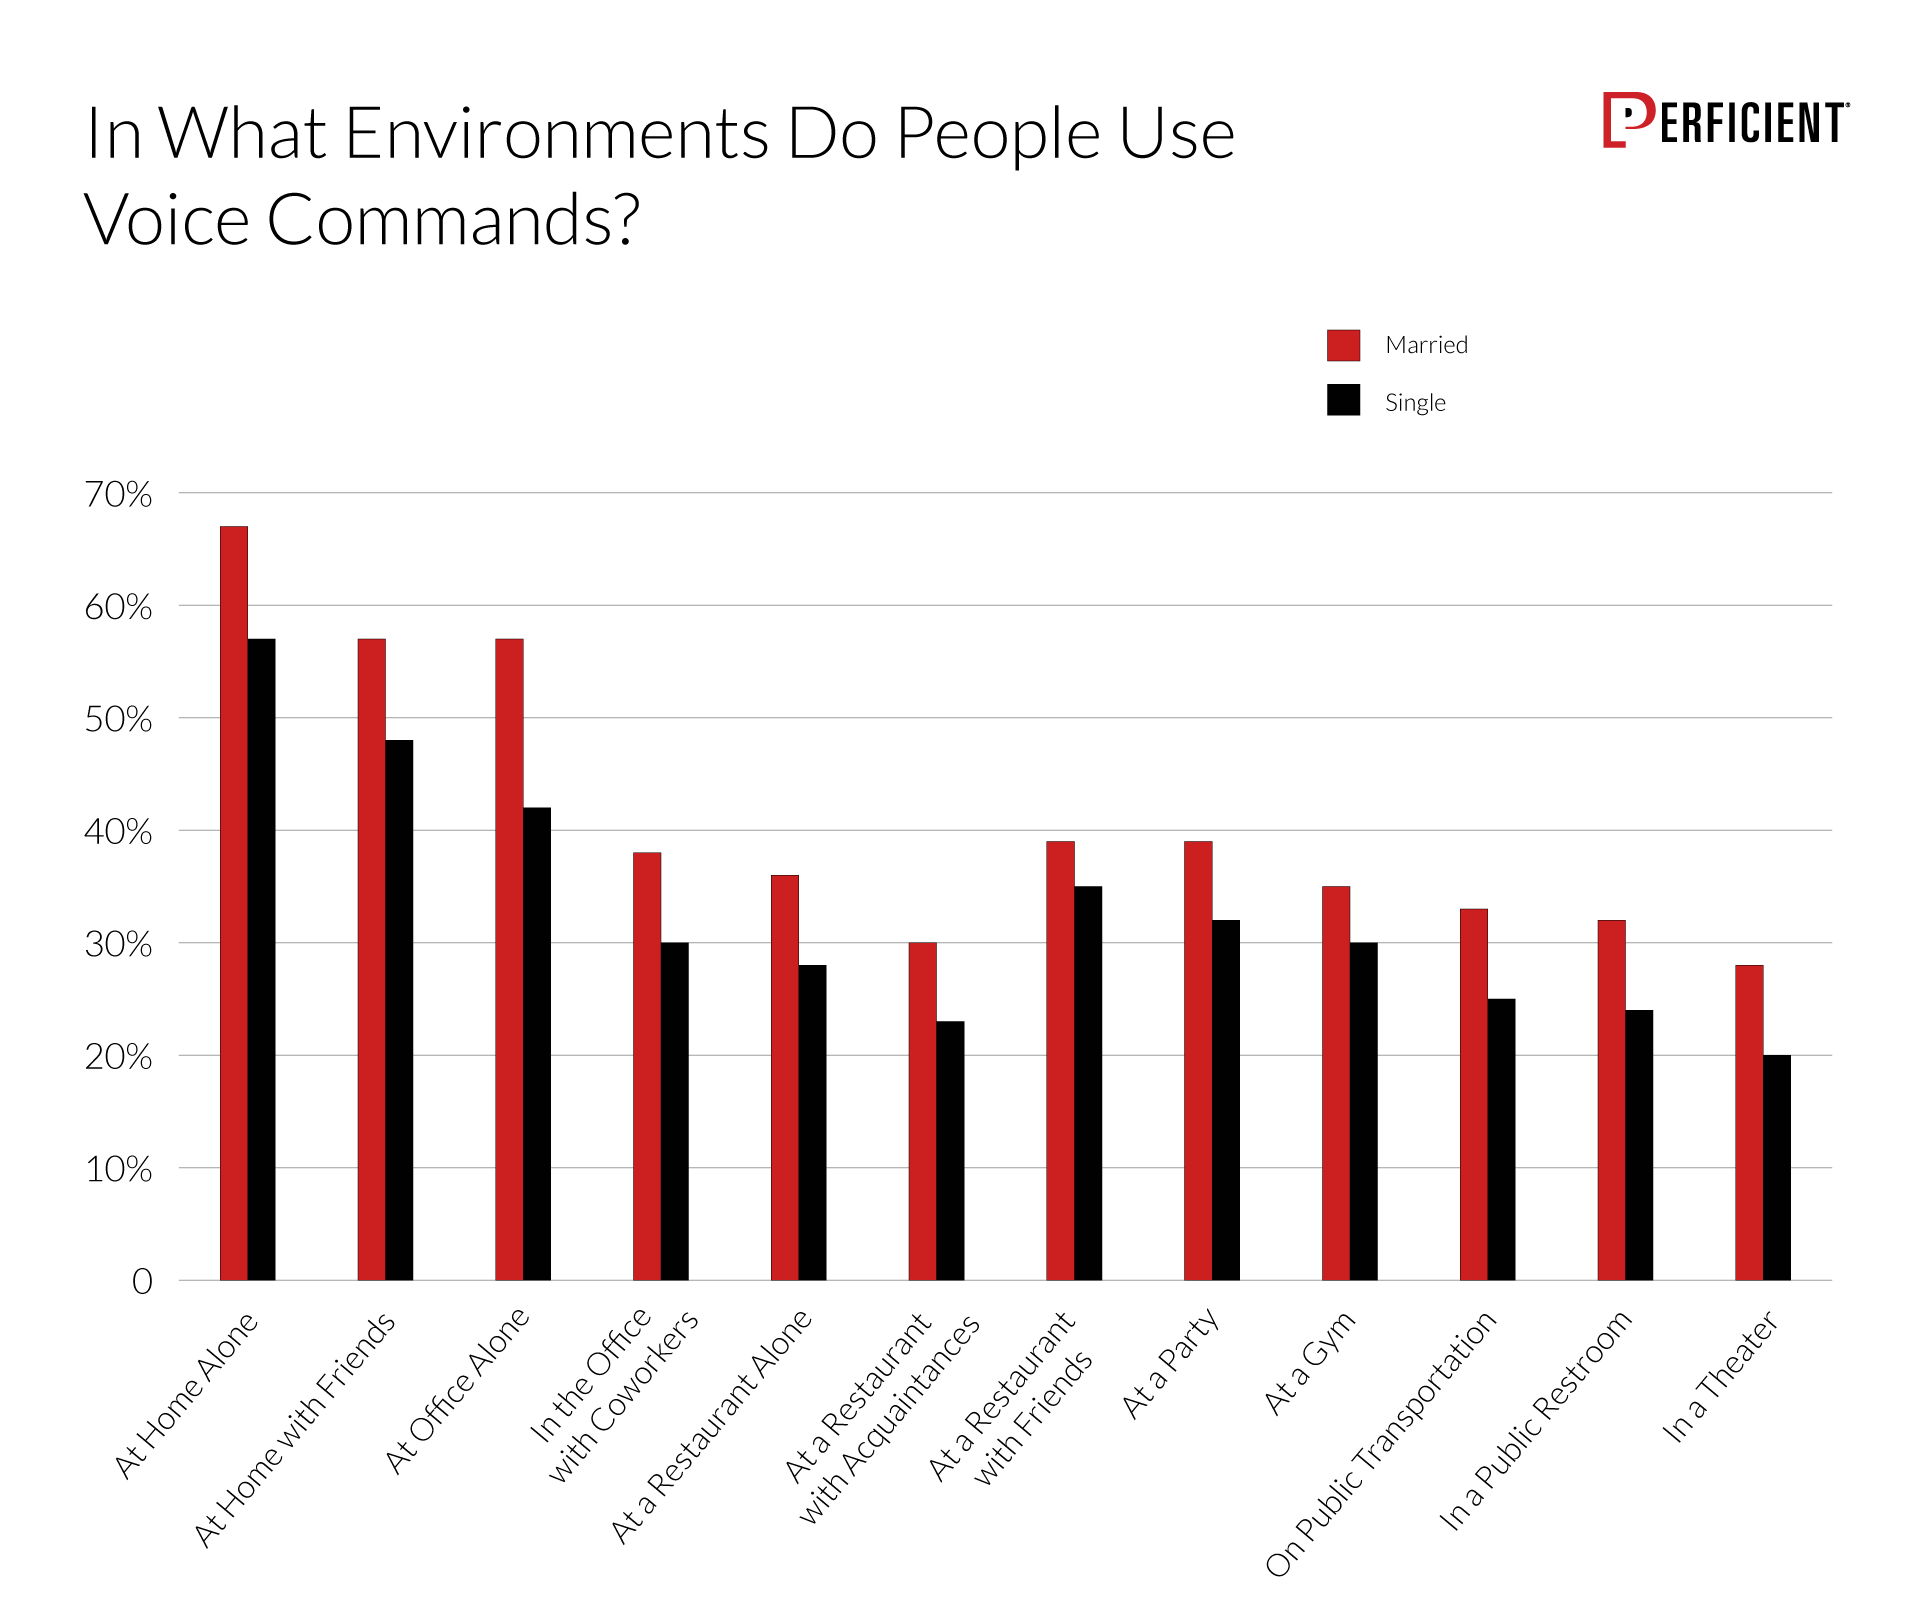 Chart shows how likely people are to use voice commands in specific environments, by marital status